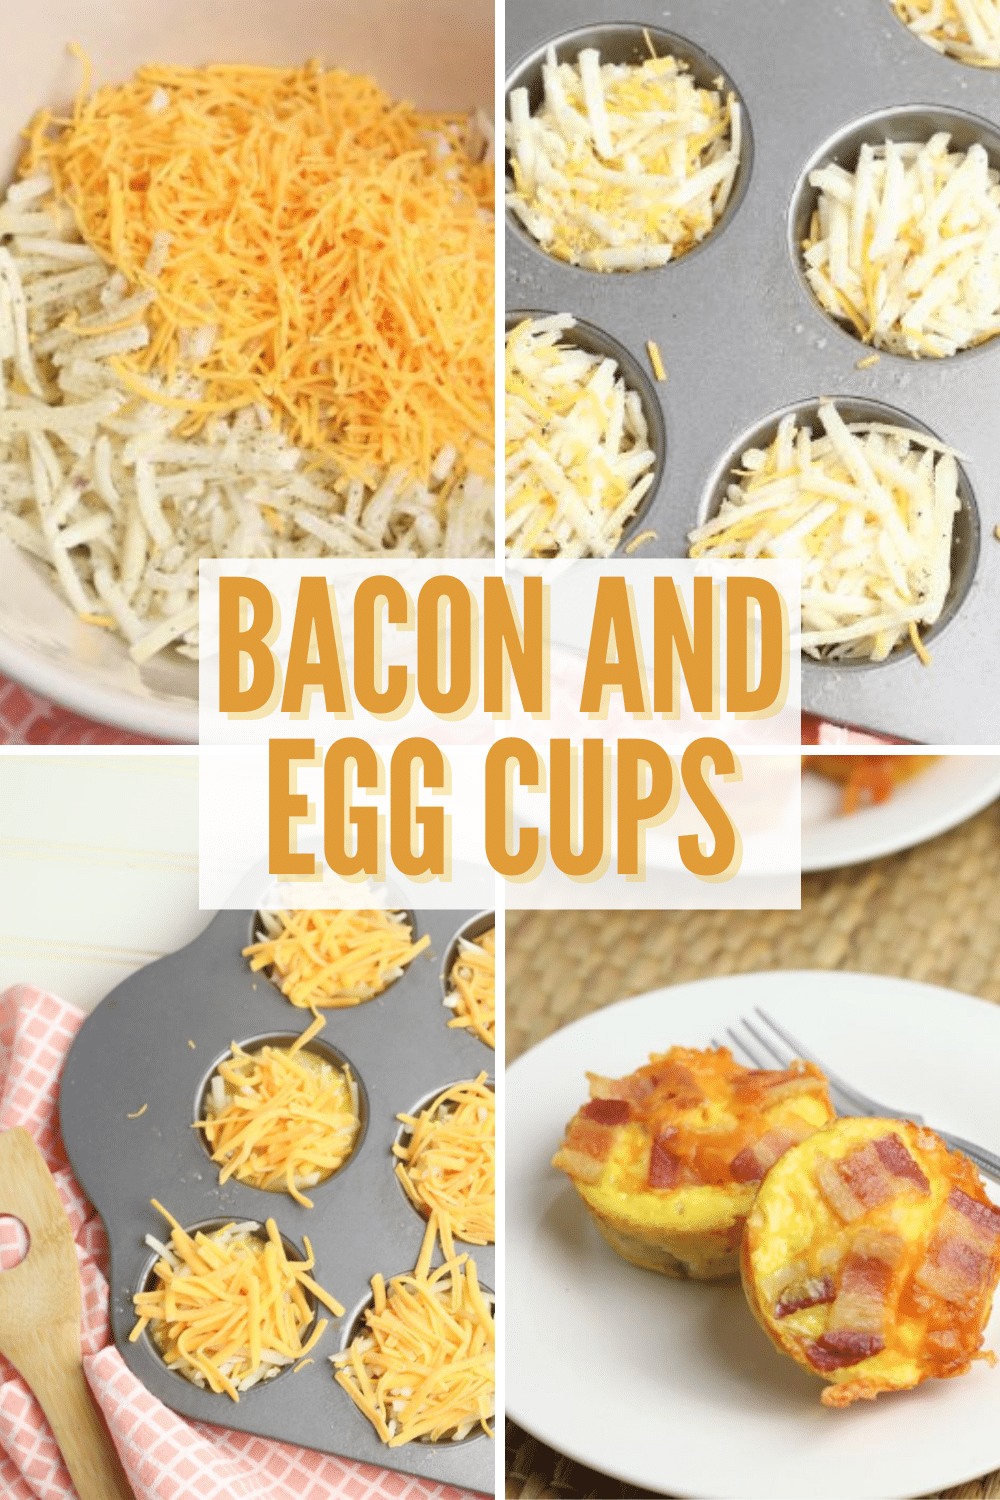 Bacon and Egg Cups are easy to make and delicious to eat. This easy breakfast recipe is great made ahead and reheated in the microwave for a snack. #breakfast #eggs #bacon via @wondermomwannab